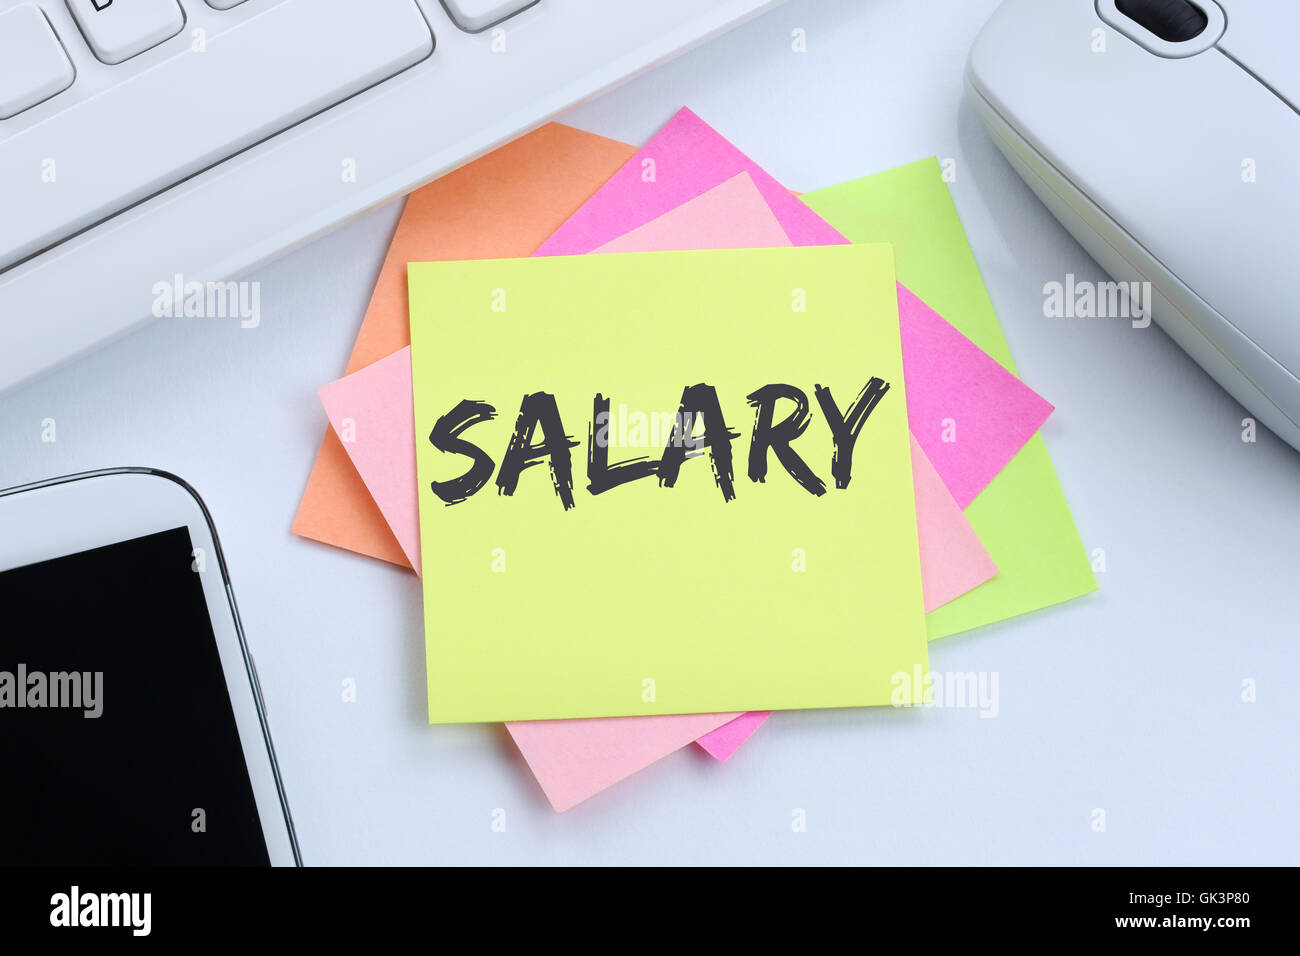 Salary increase negotiation wages money finance business concept desk computer keyboard Stock Photo